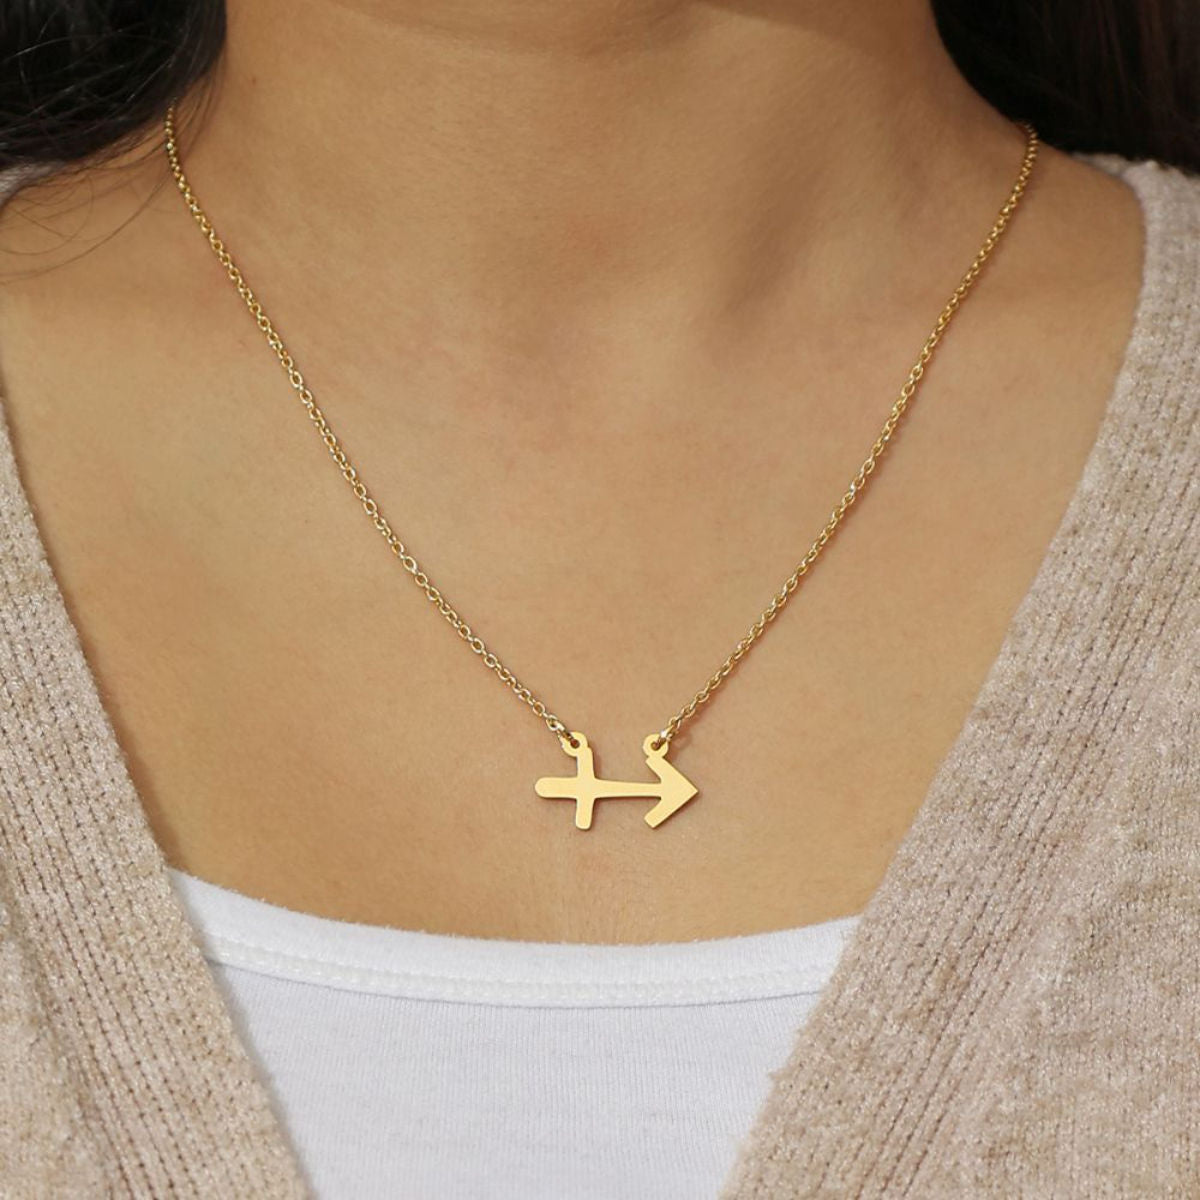 Sagittarius Astrological Necklace in Gold with Diamonds • Forever Jewels